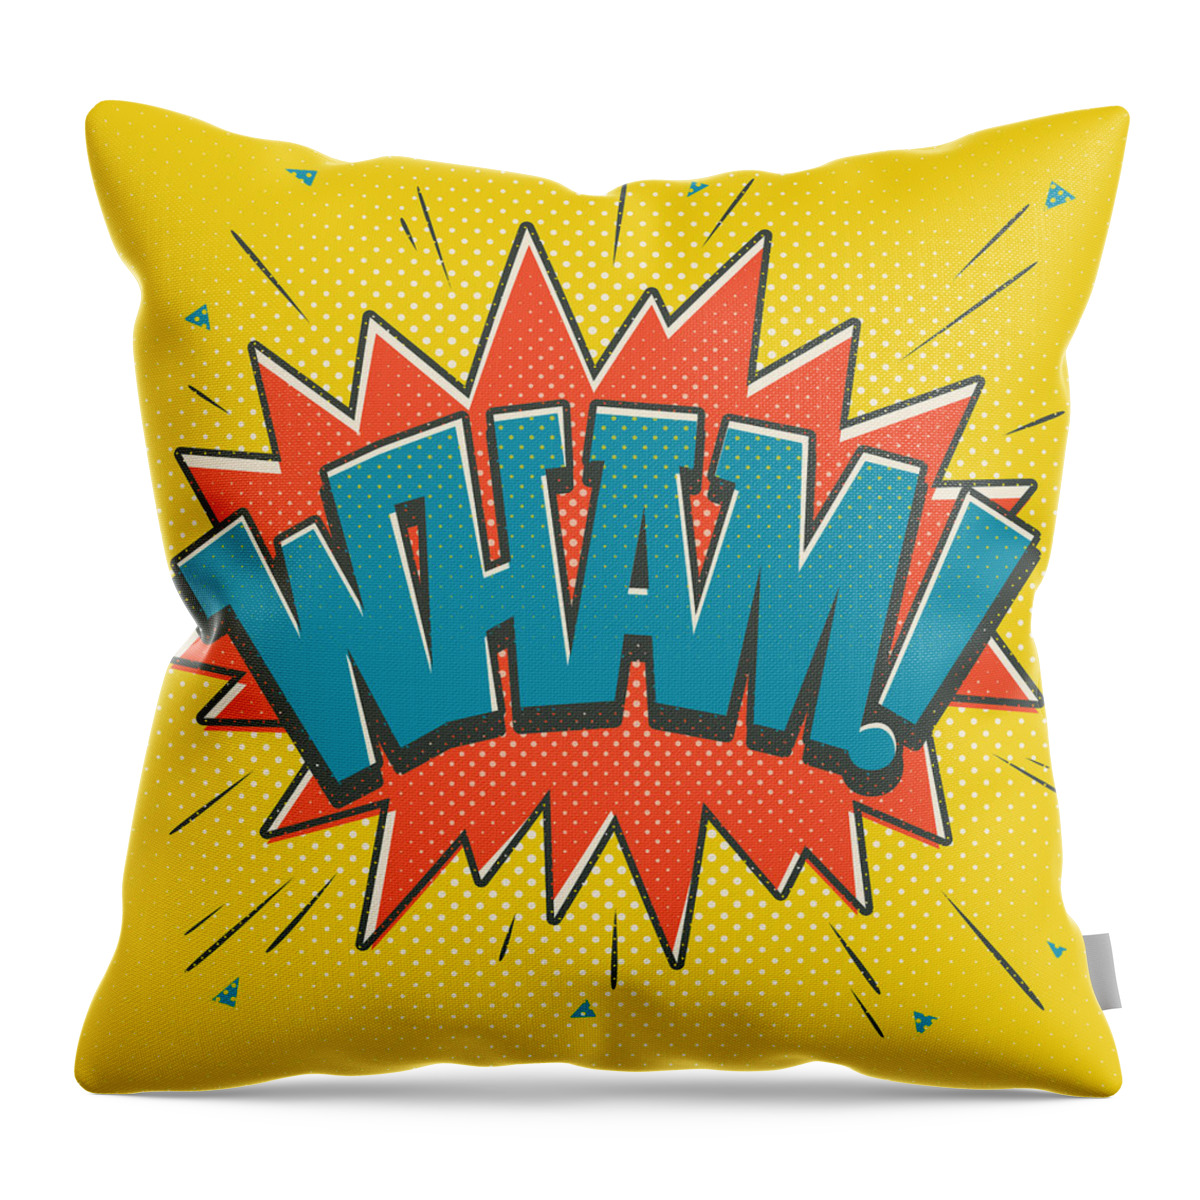 Comic Throw Pillow featuring the digital art Comic Wham by Mitch Frey